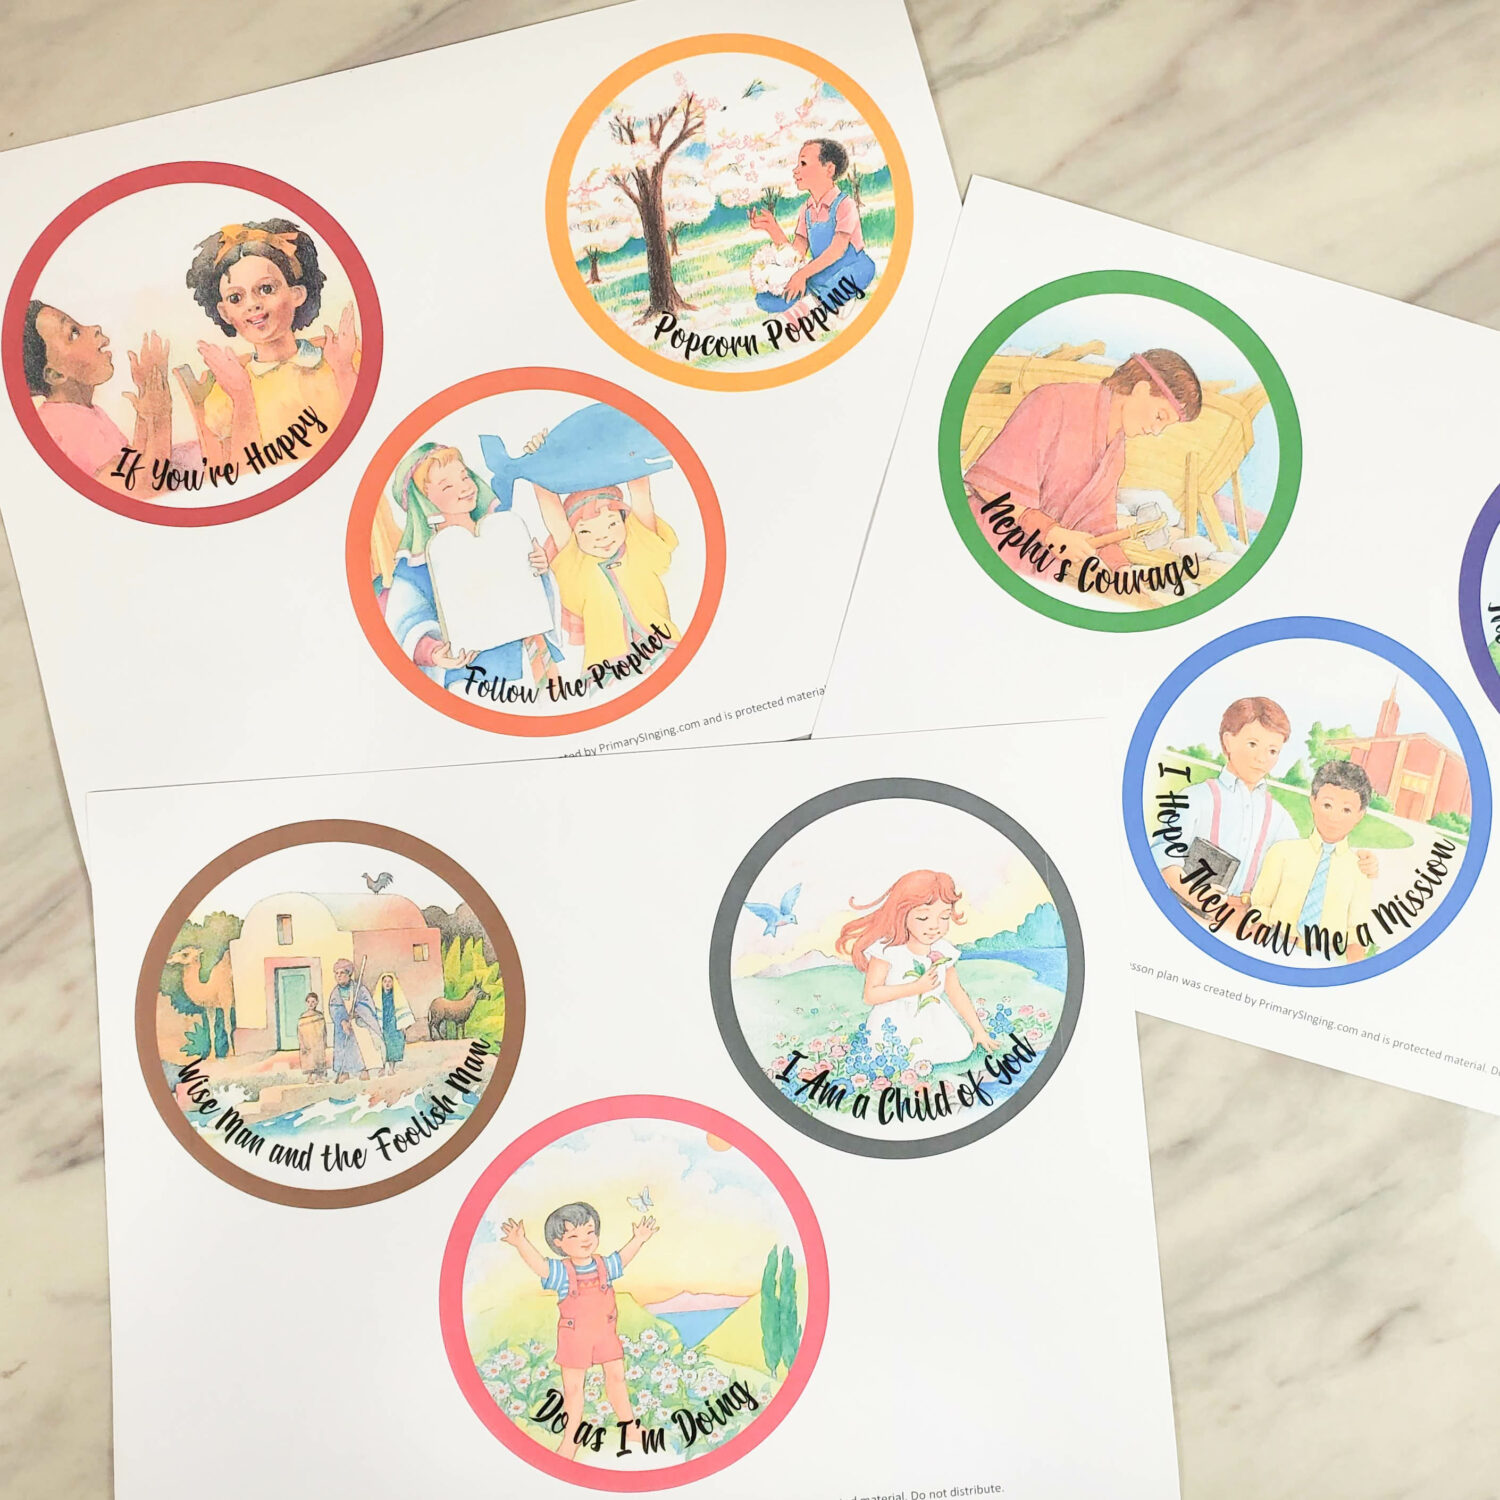 Nursery Singing Time Song Cards - make singing time for your nursery kiddos a breeze with these adorable song selection cards! Plus, a printable schedule with 2 monthly rotatable schedules to get through a variety of songs while keeping consistency.